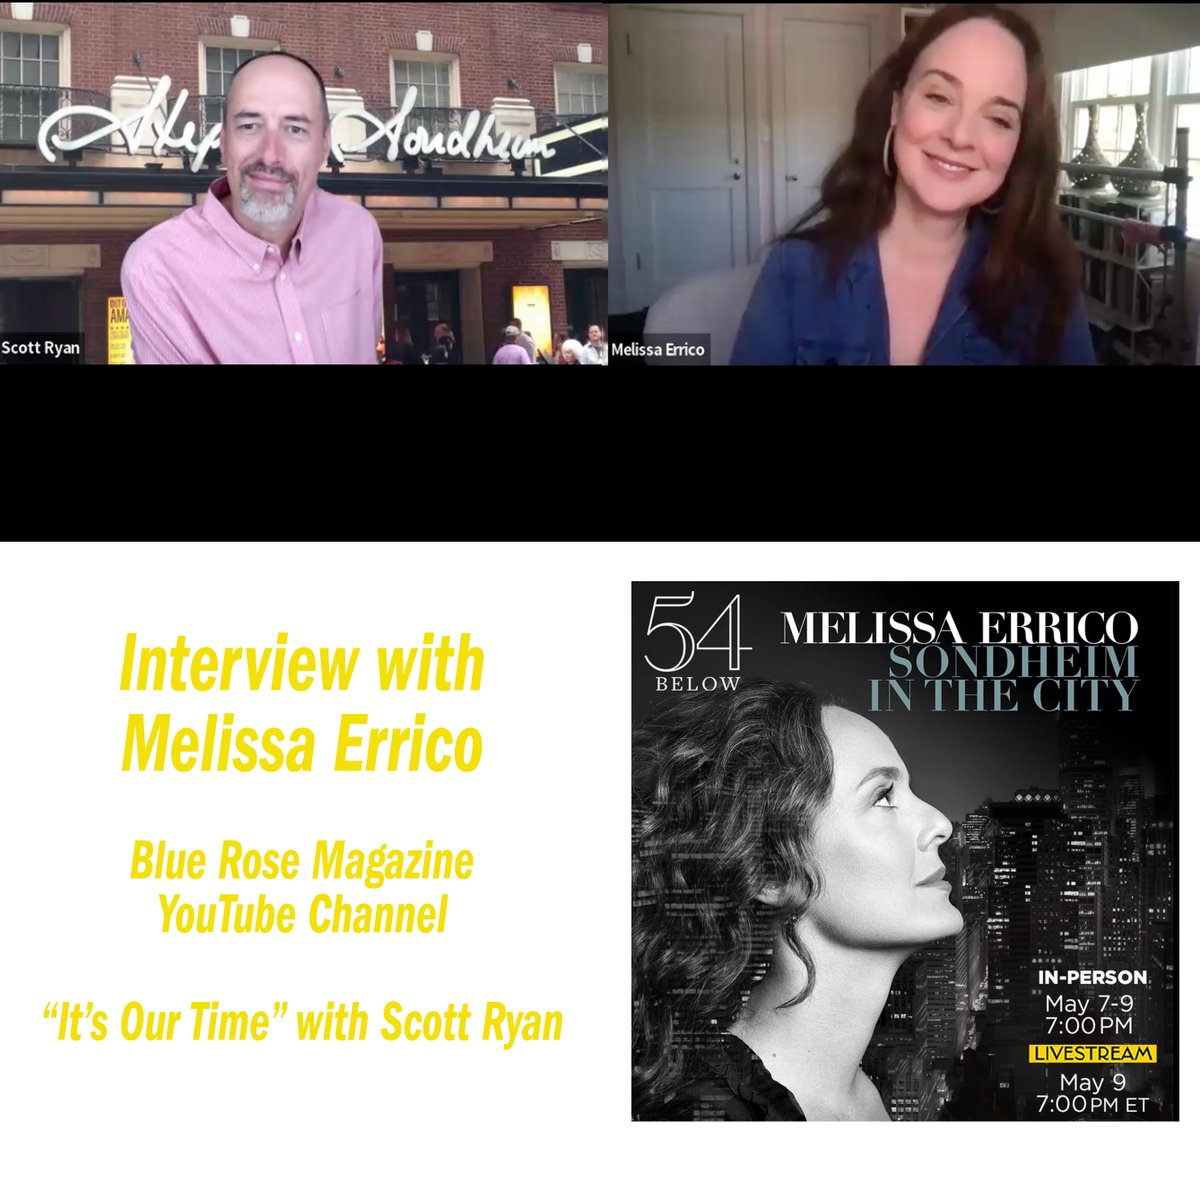 Broadway star #Melissaerrico has a new #Sondheim album out and we discuss it on my latest episode. We also talk about her work with #MichelLegrand and I know @babsdude knew I was gonna ask about On My Way To You. Check out our interview. youtu.be/kq9OwMpBeIA